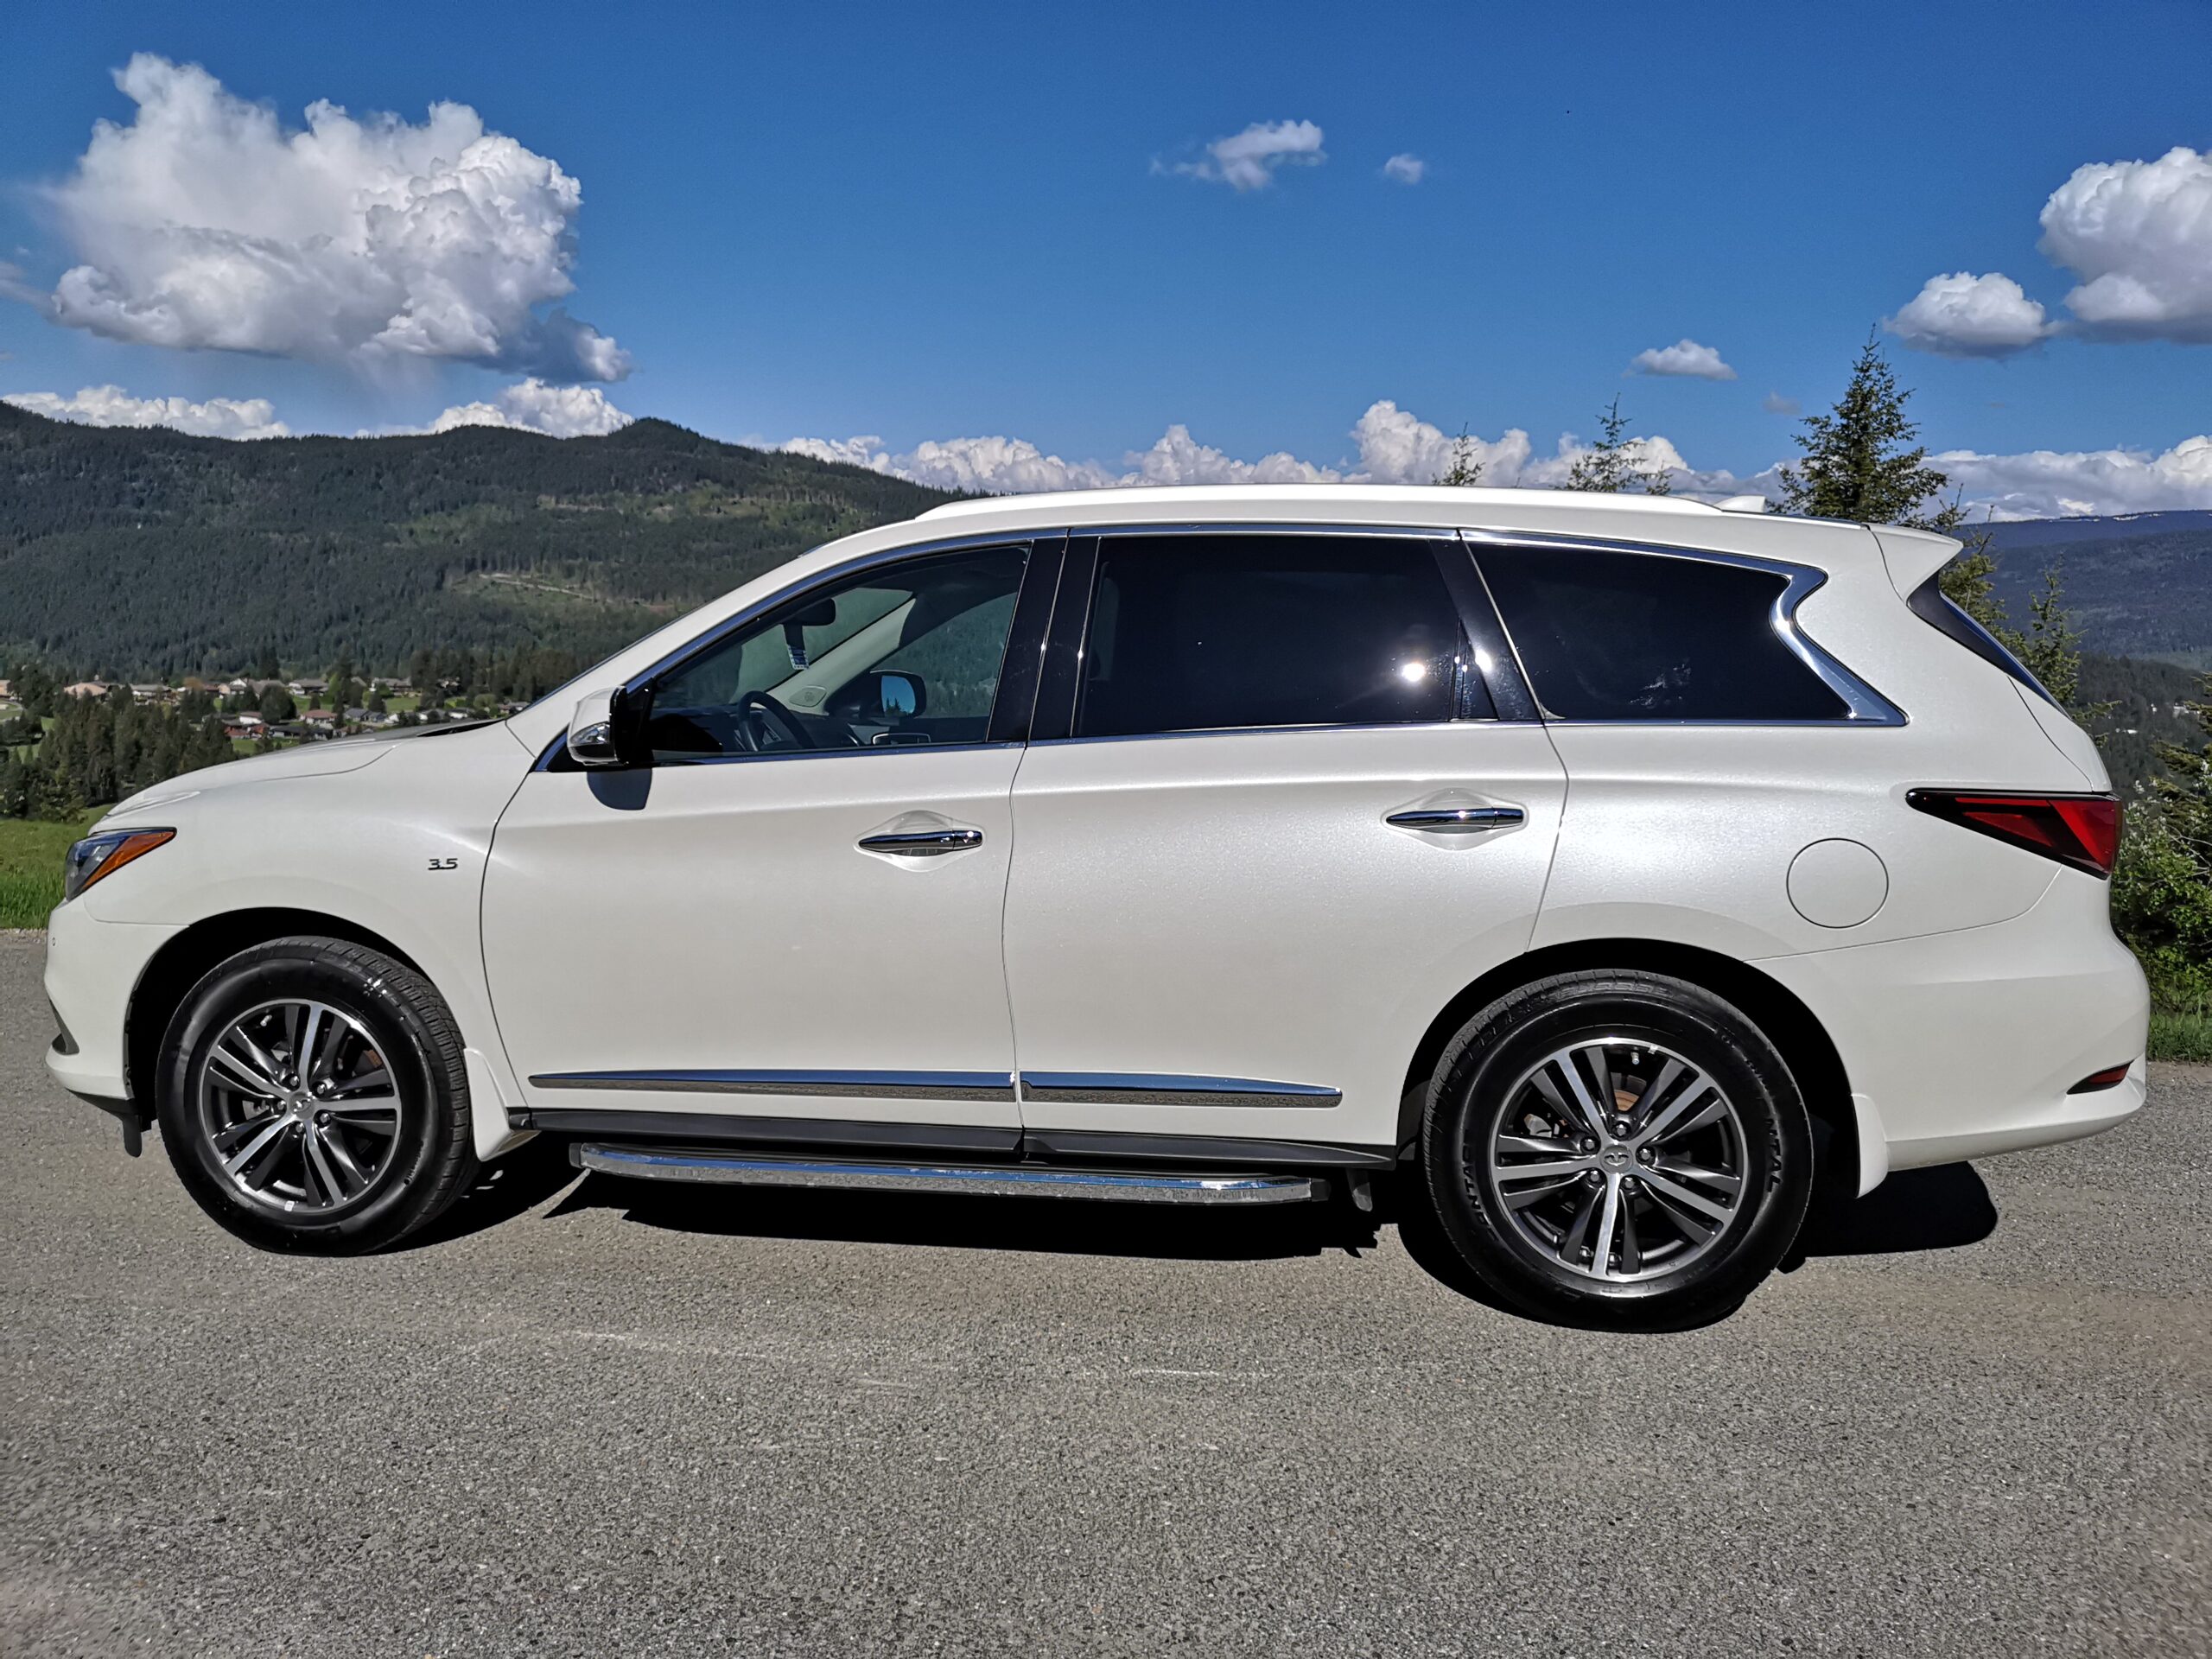 Inifiniti QX60 auto detail in the Shuswap